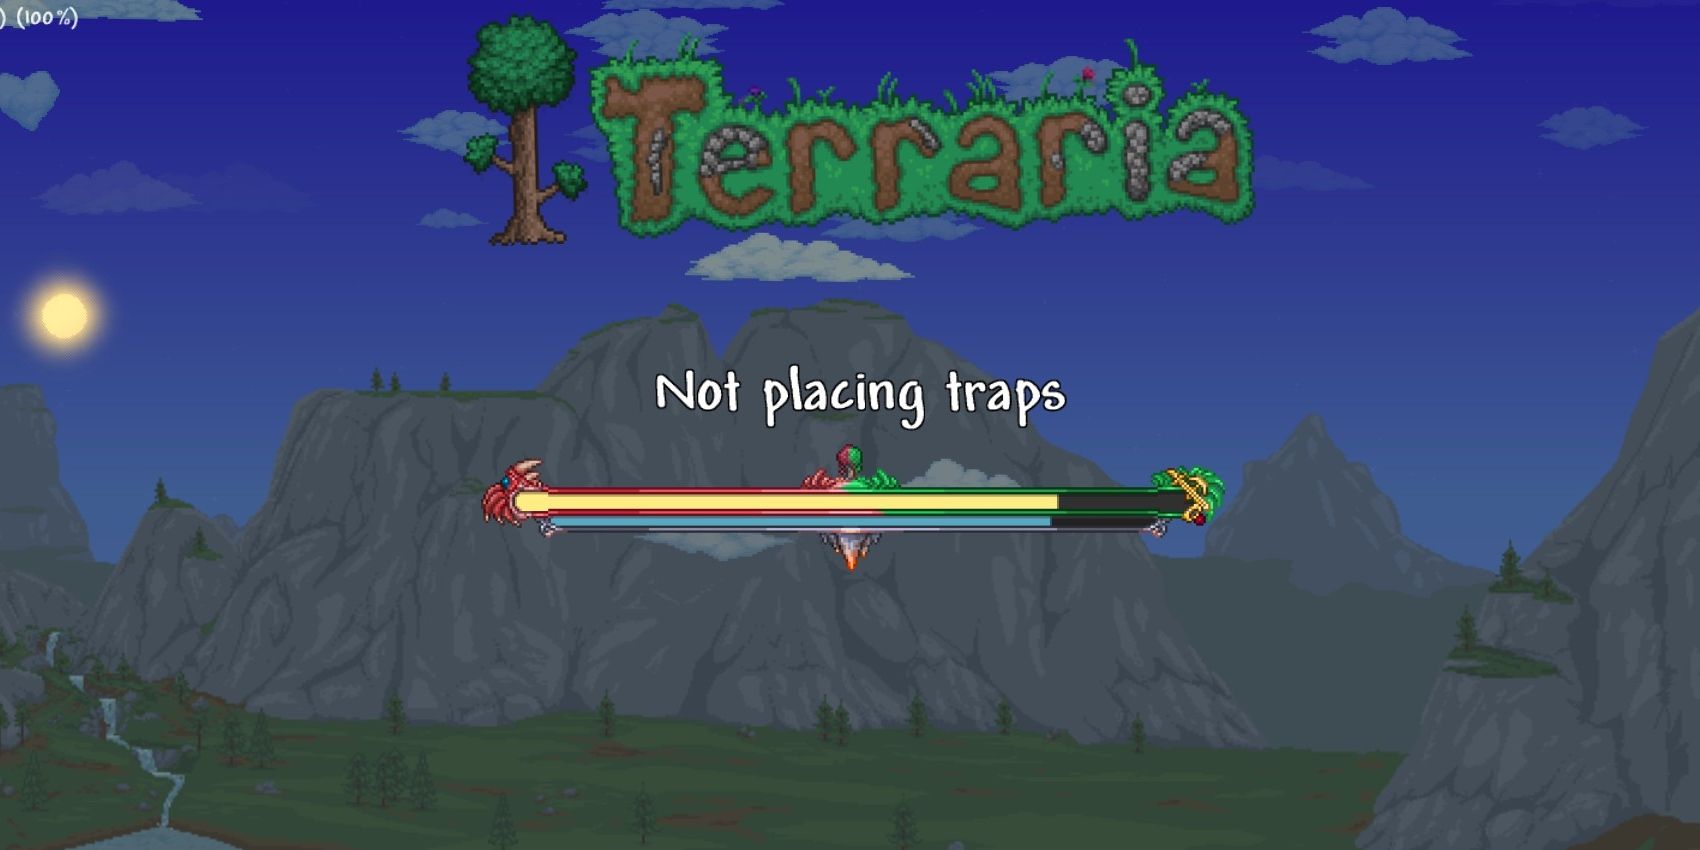 The loading screen for the No Traps seed in Terraria.